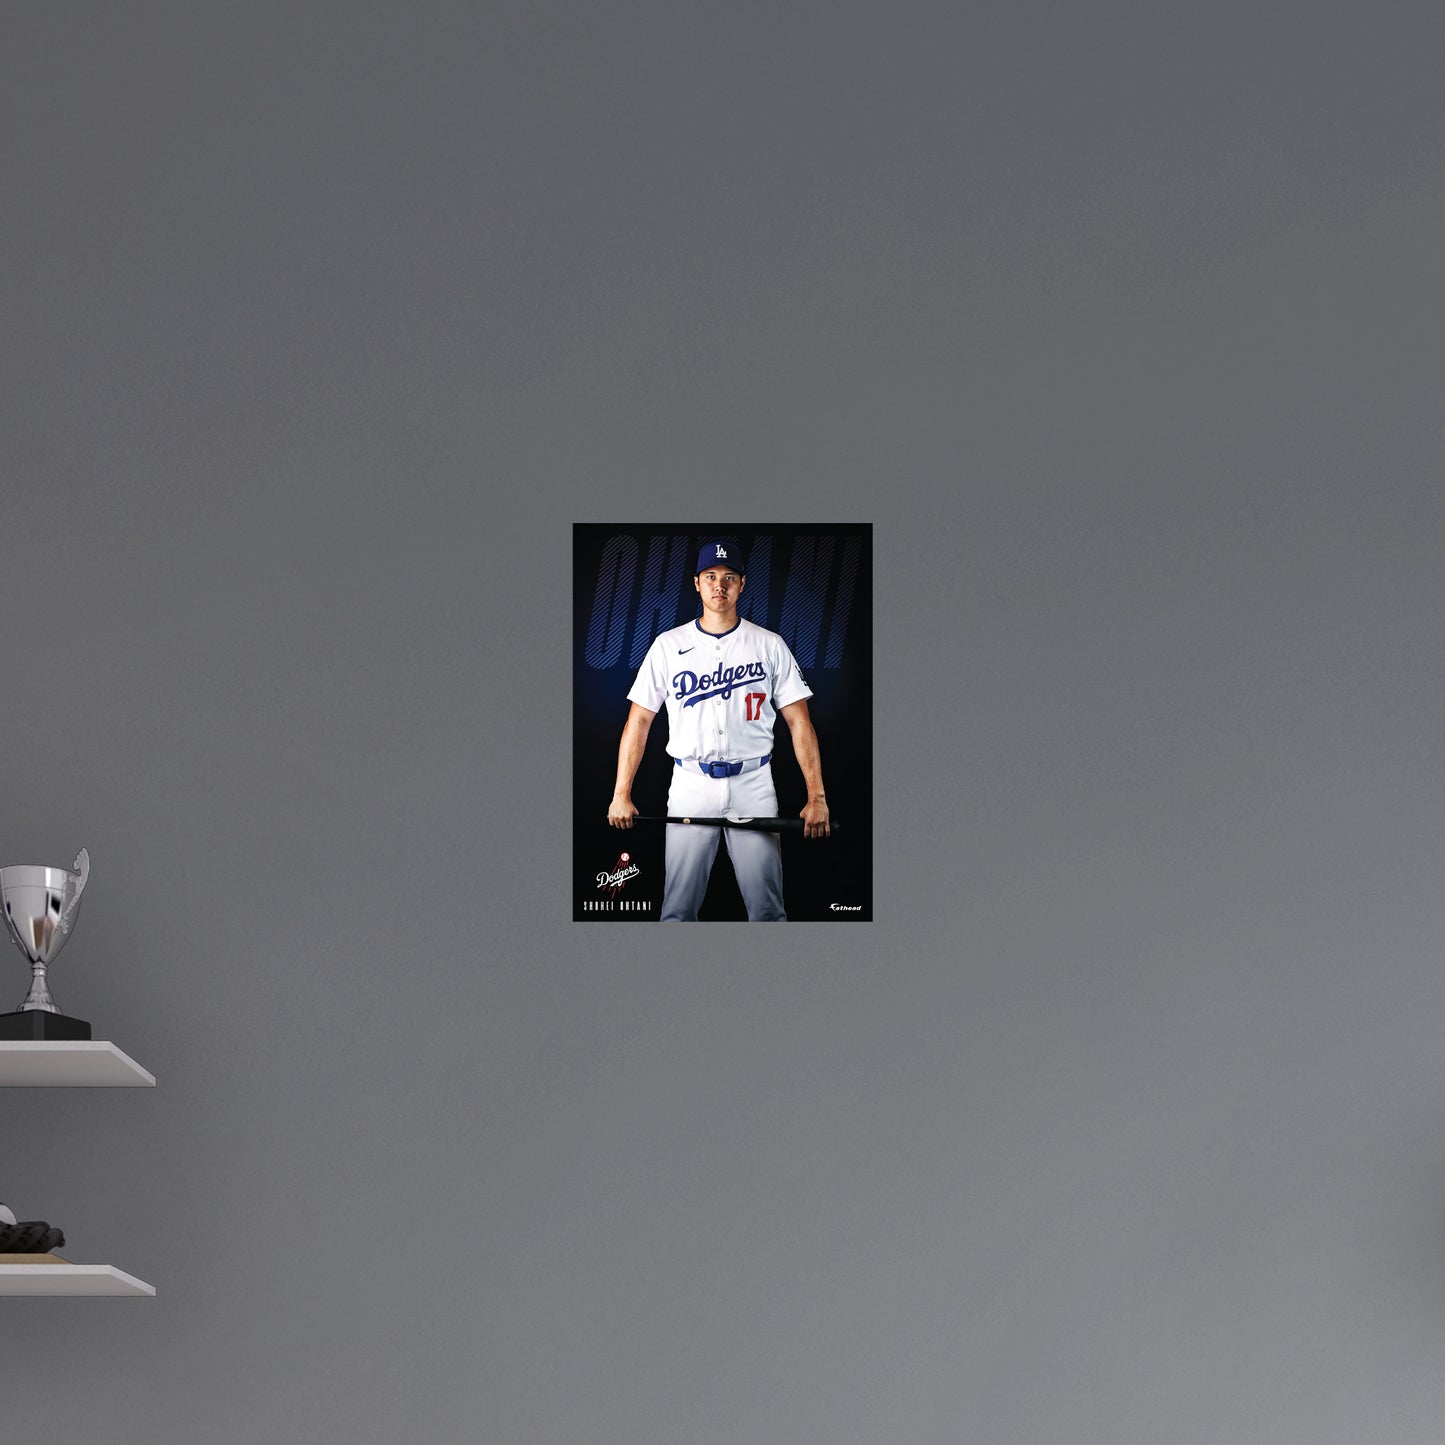 Los Angeles Dodgers: Shohei Ohtani Poster        - Officially Licensed MLB Removable     Adhesive Decal